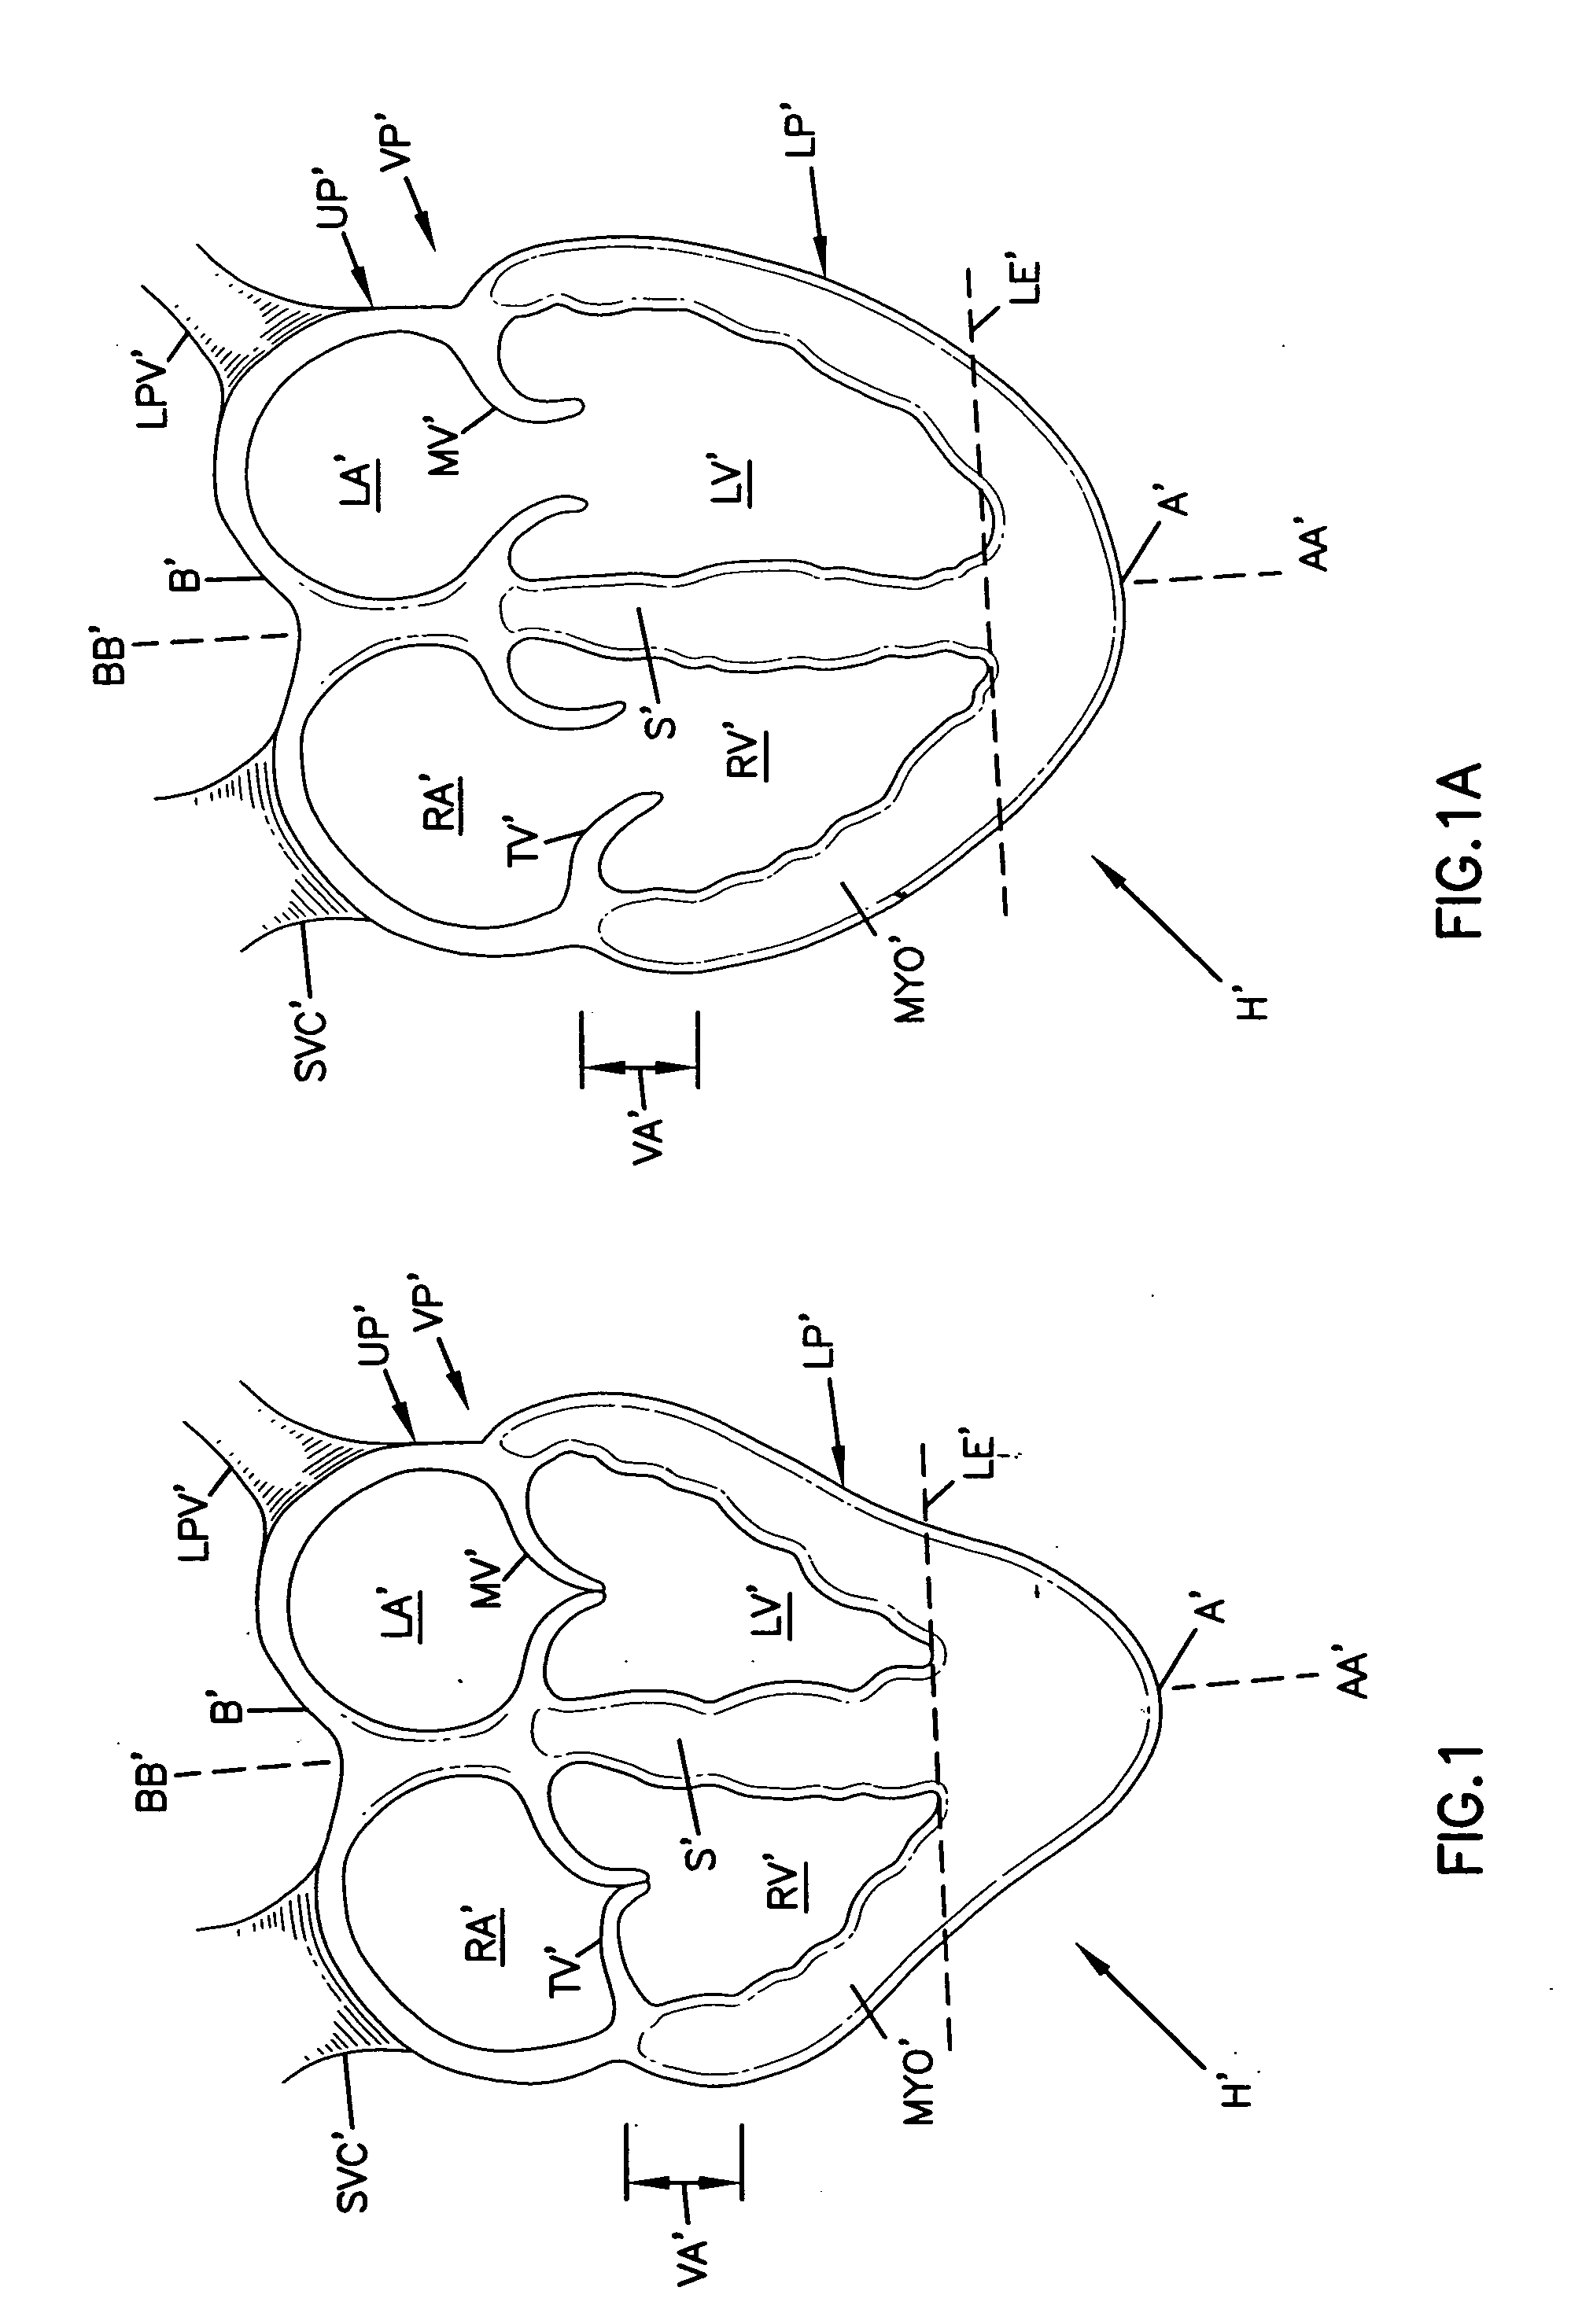 Cardiac support device